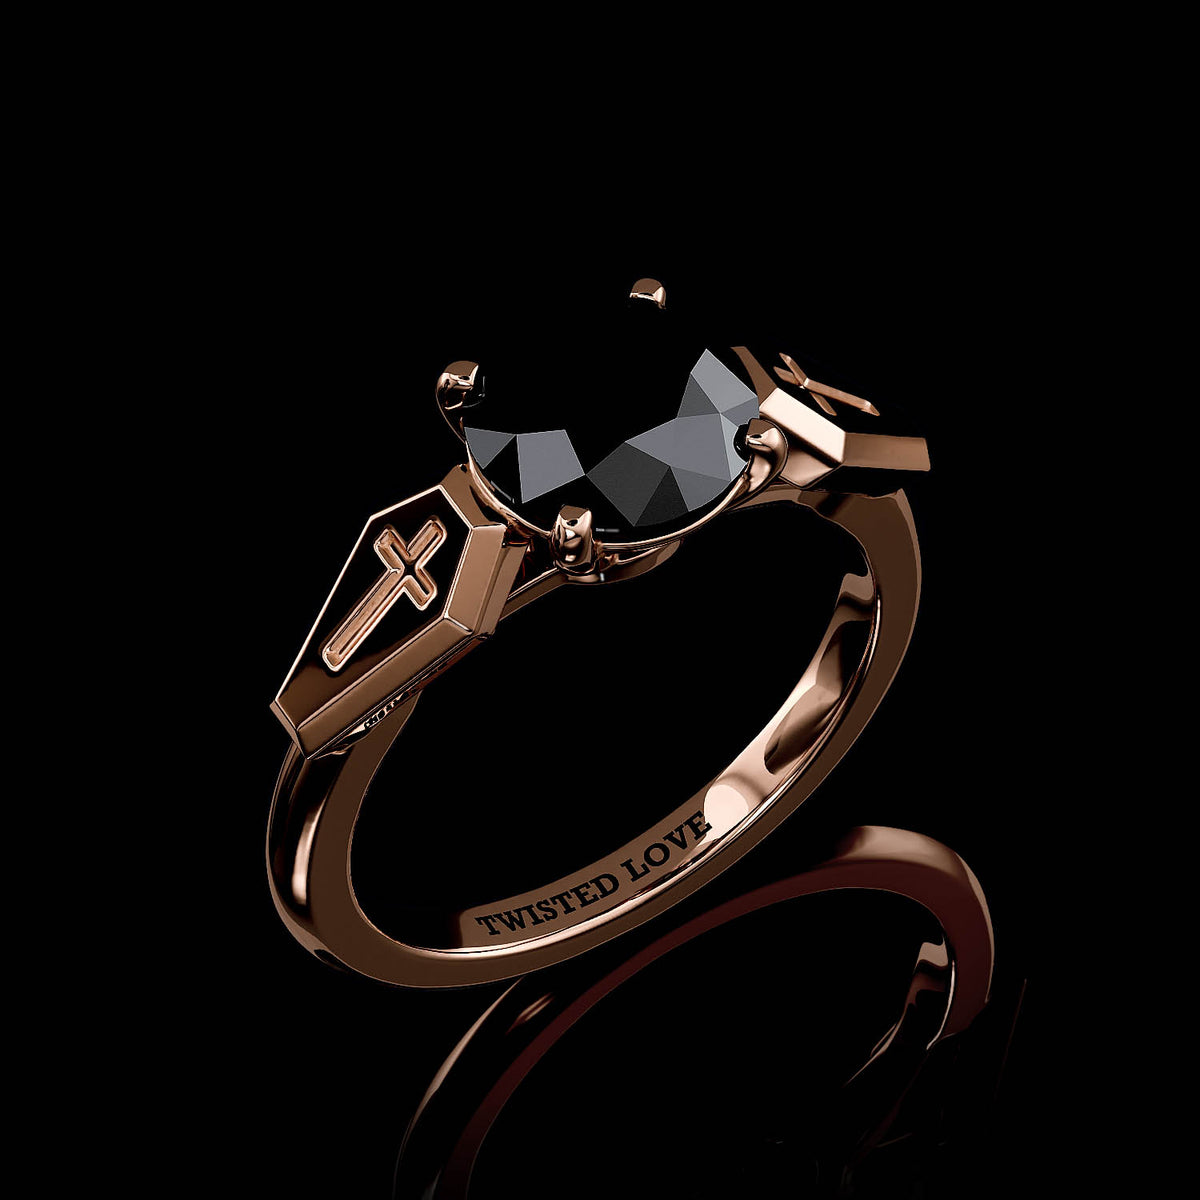 Horseshoe Ring - Brass – Twisted Love Jewelry Works NYC